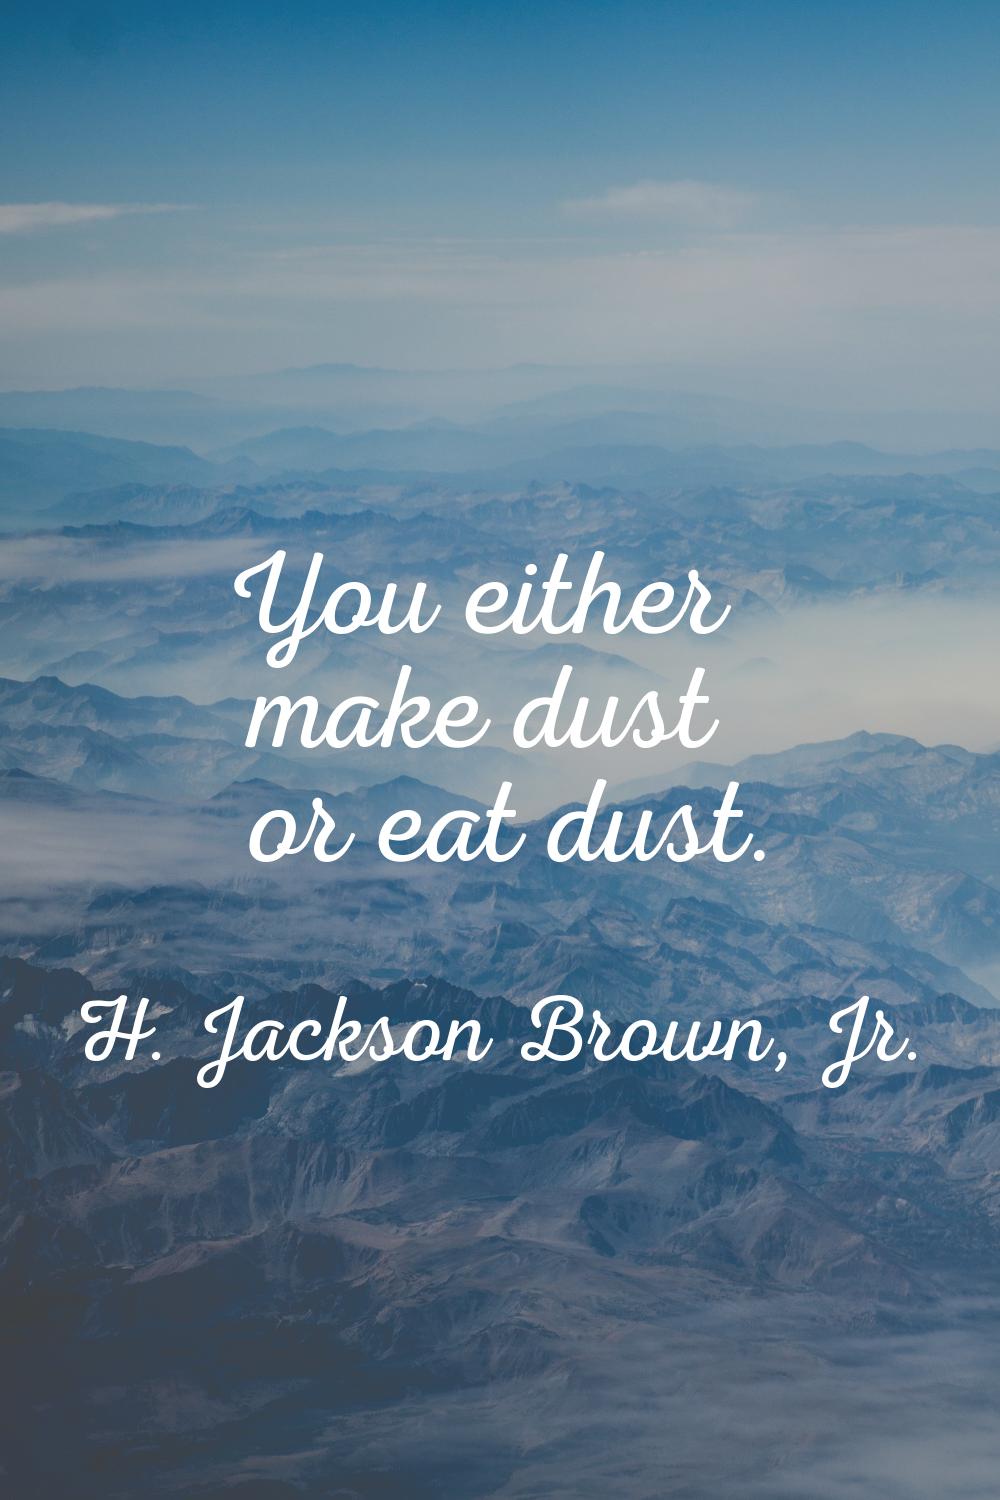 You either make dust or eat dust.